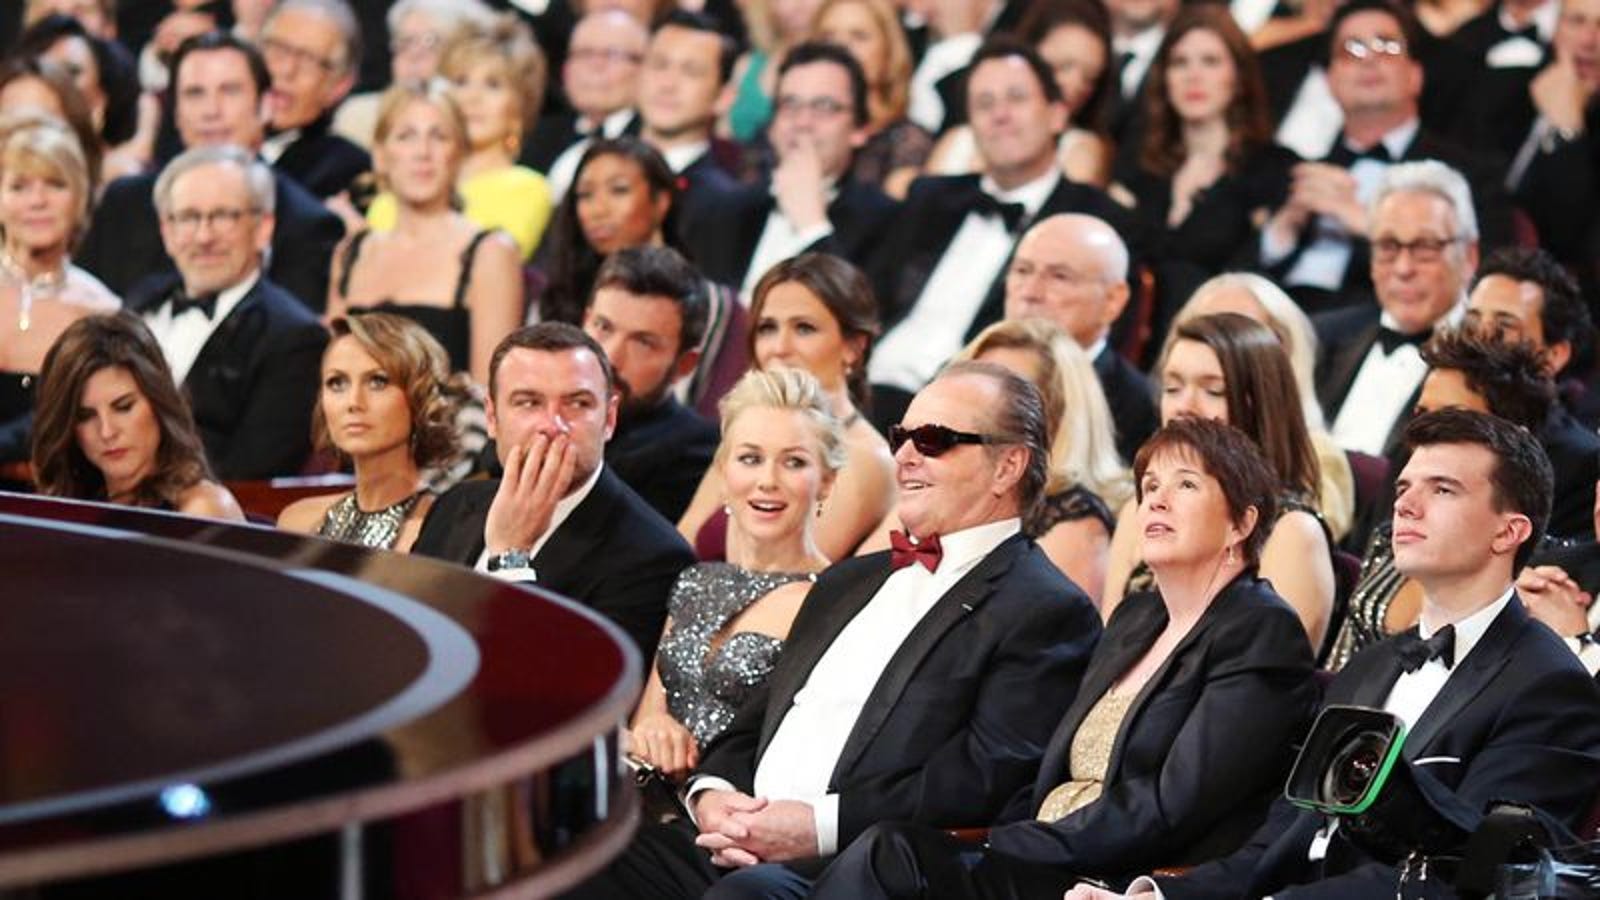 Oscars Attendees Cower In Awe As Disembodied, AllKnowing Voice